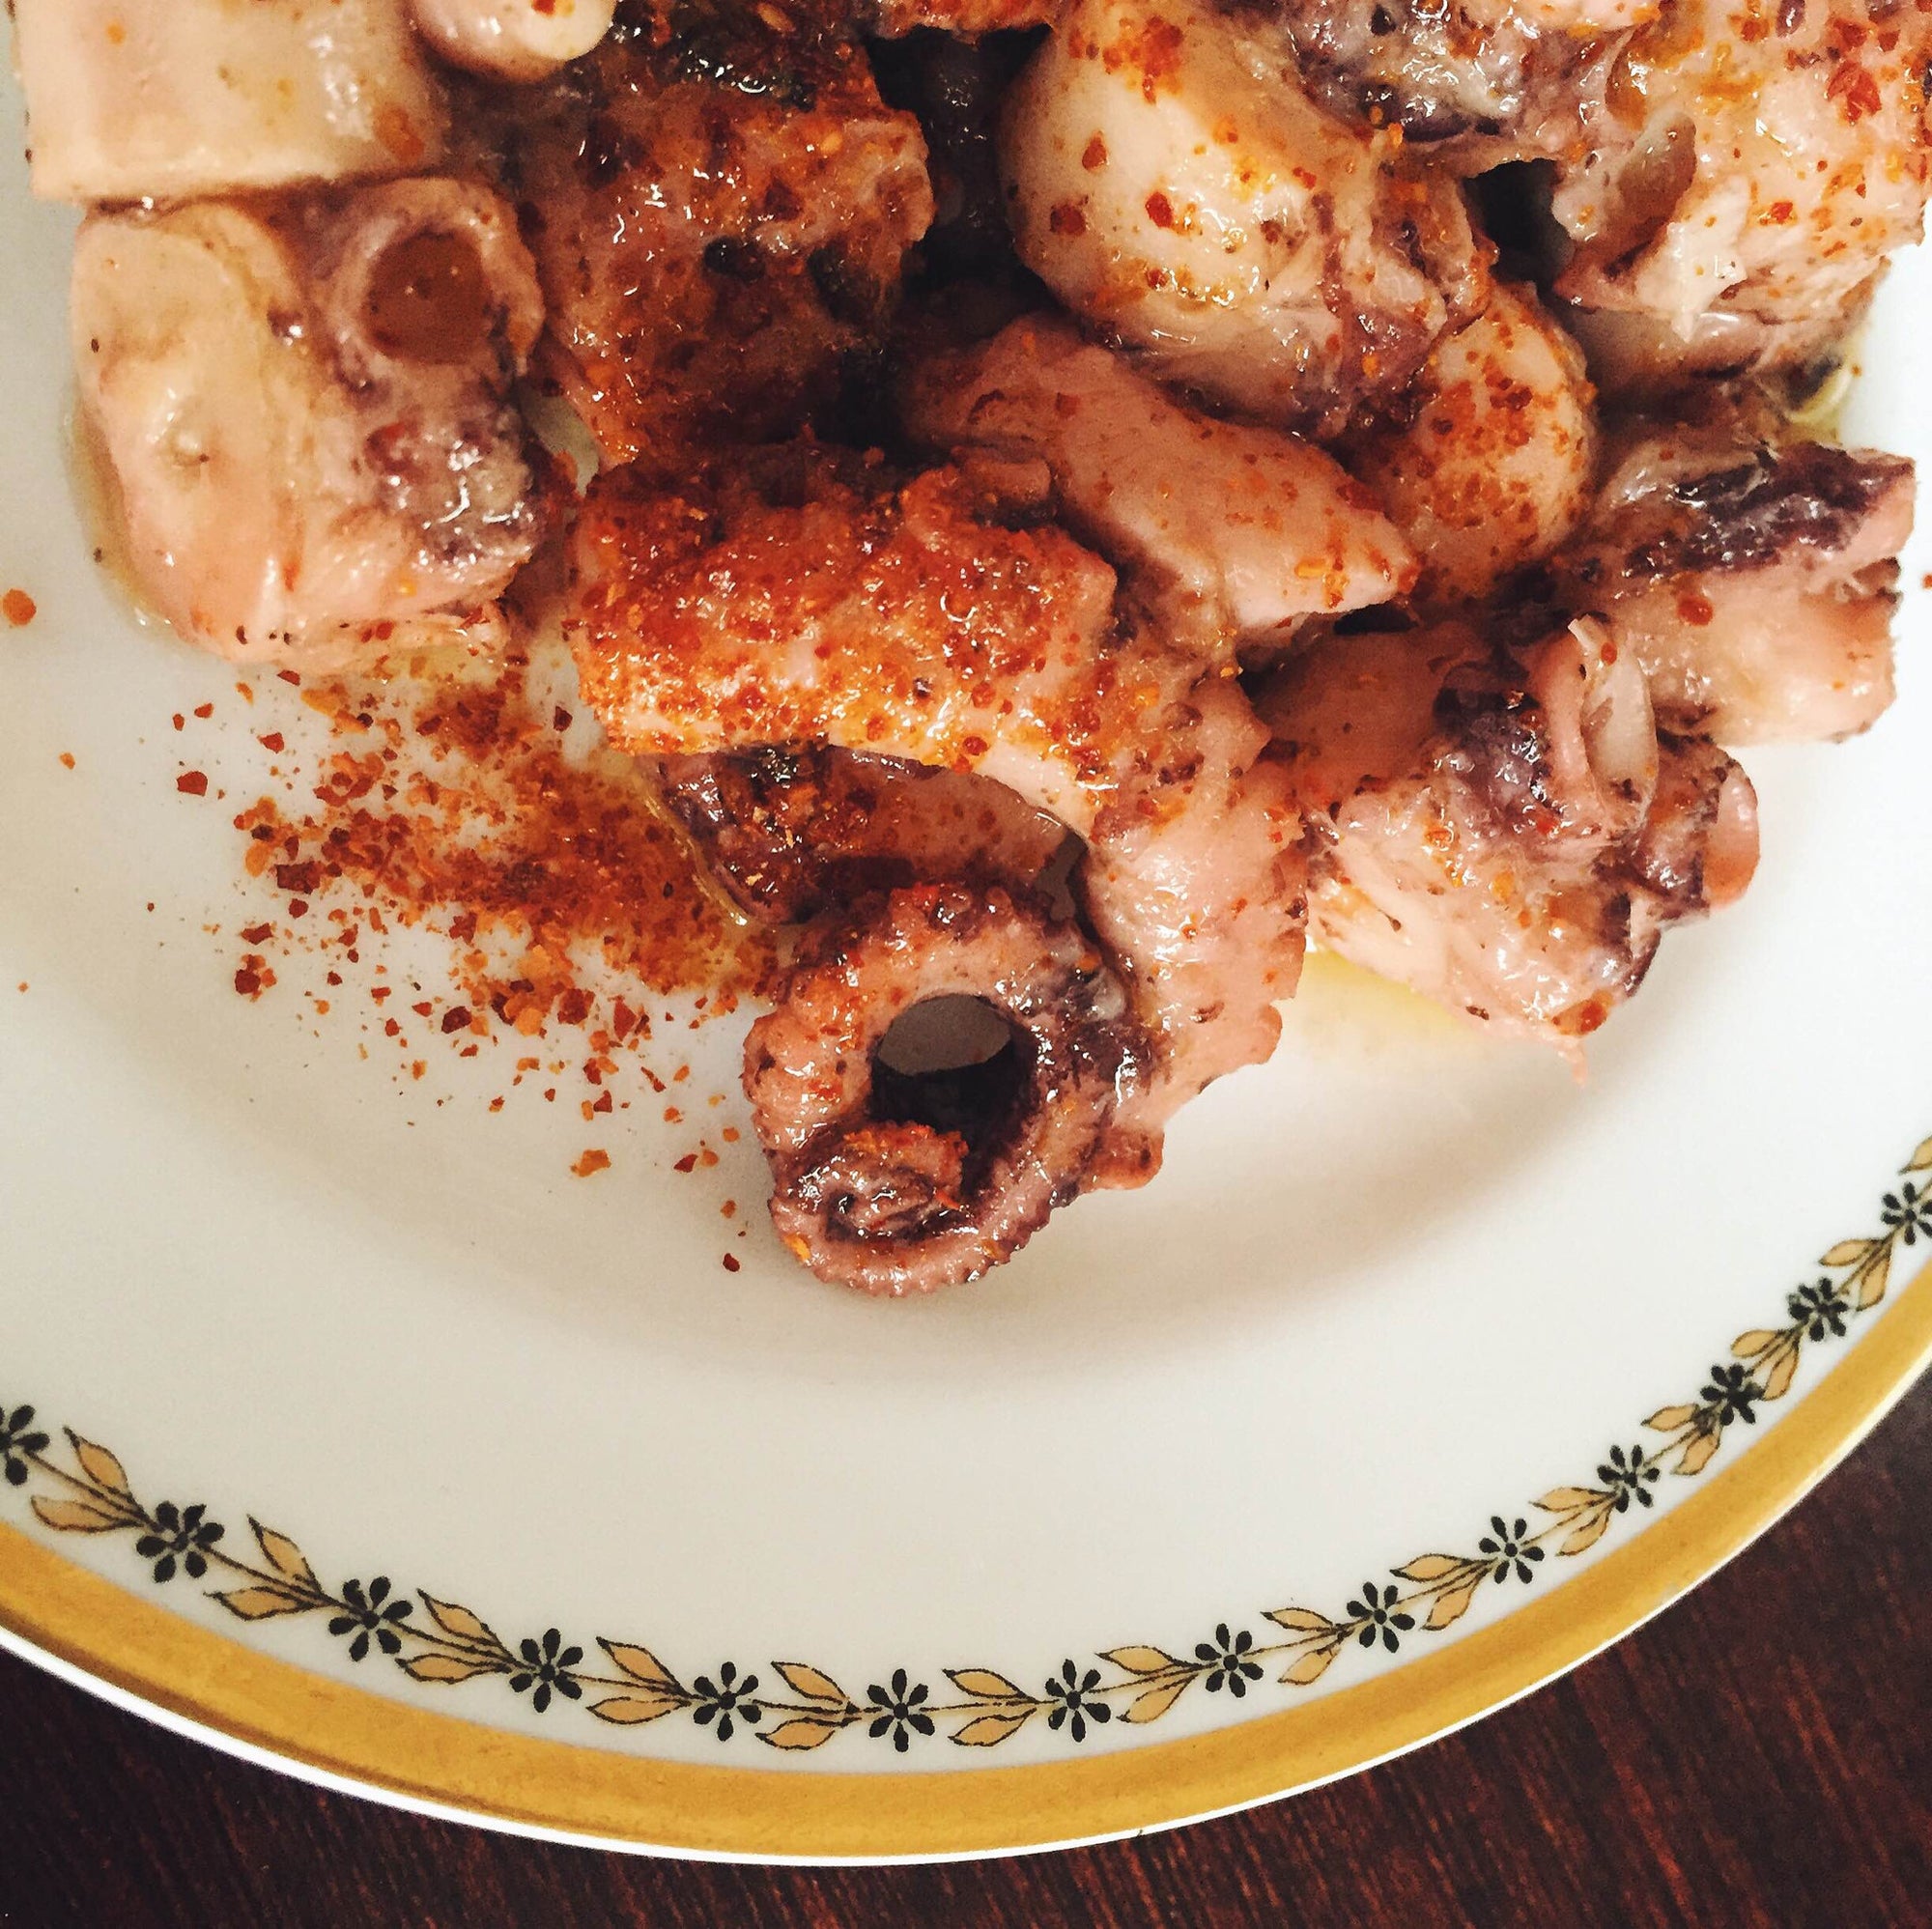 Octopus in Olive Oil with Piment d'Espelette